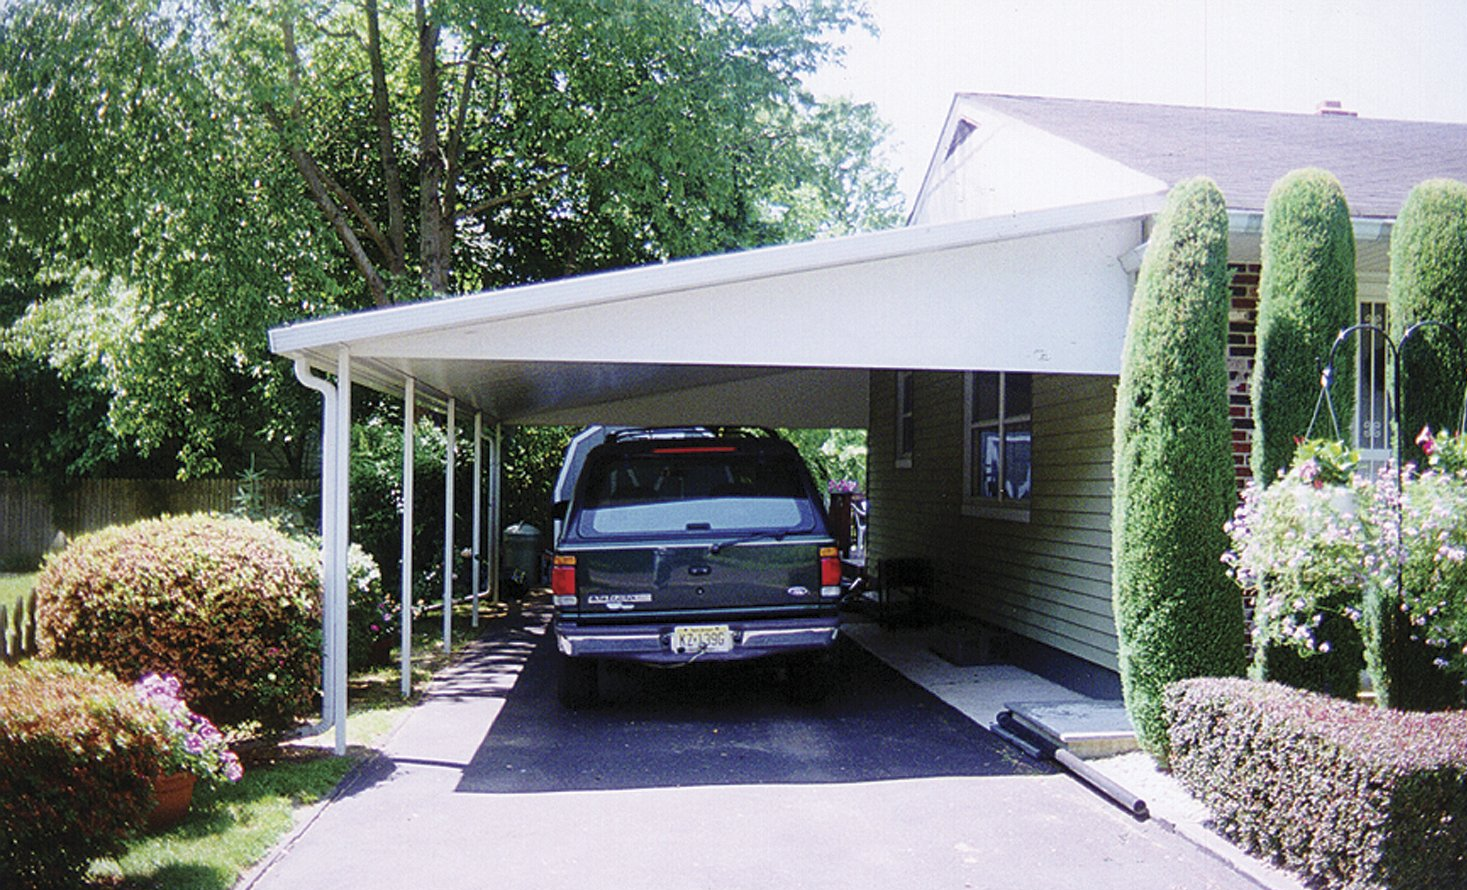 Patio Covers and Carports Betterliving Patio & Sunrooms of Pittsburgh